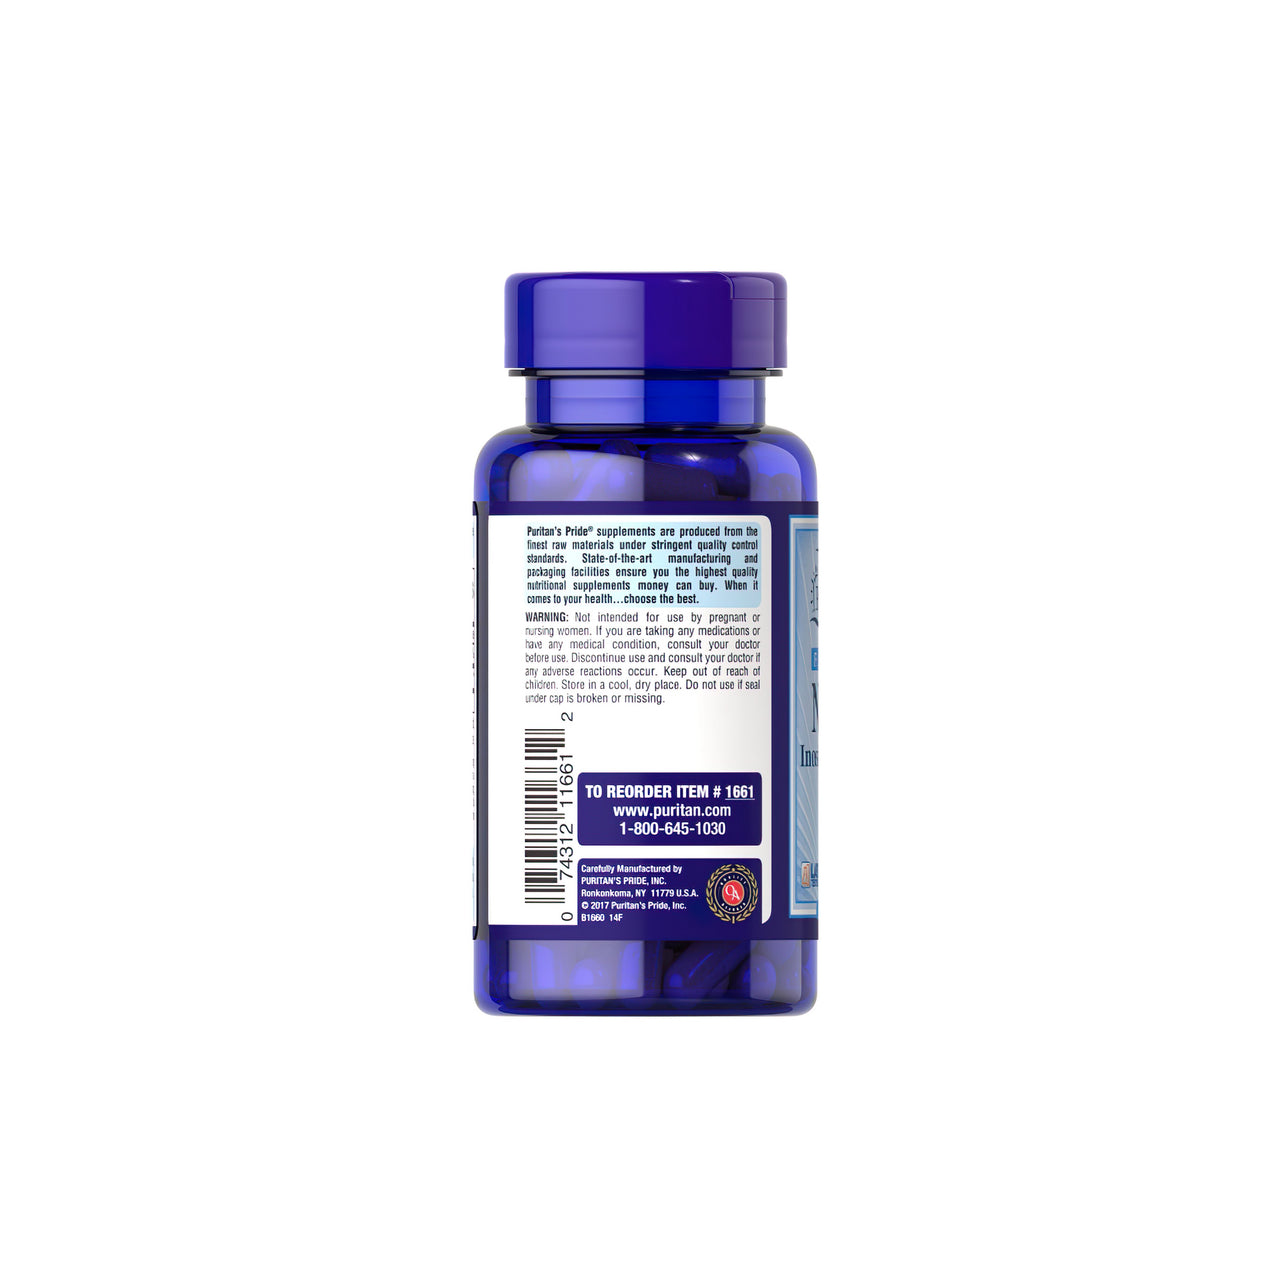 The back of a bottle of Vitamin B-3 Niacin Flush Free 500 mg 100 Rapid Release Capsules, highlighting its benefits for cardiovascular wellness and heart health. (Brand: Puritan's Pride)